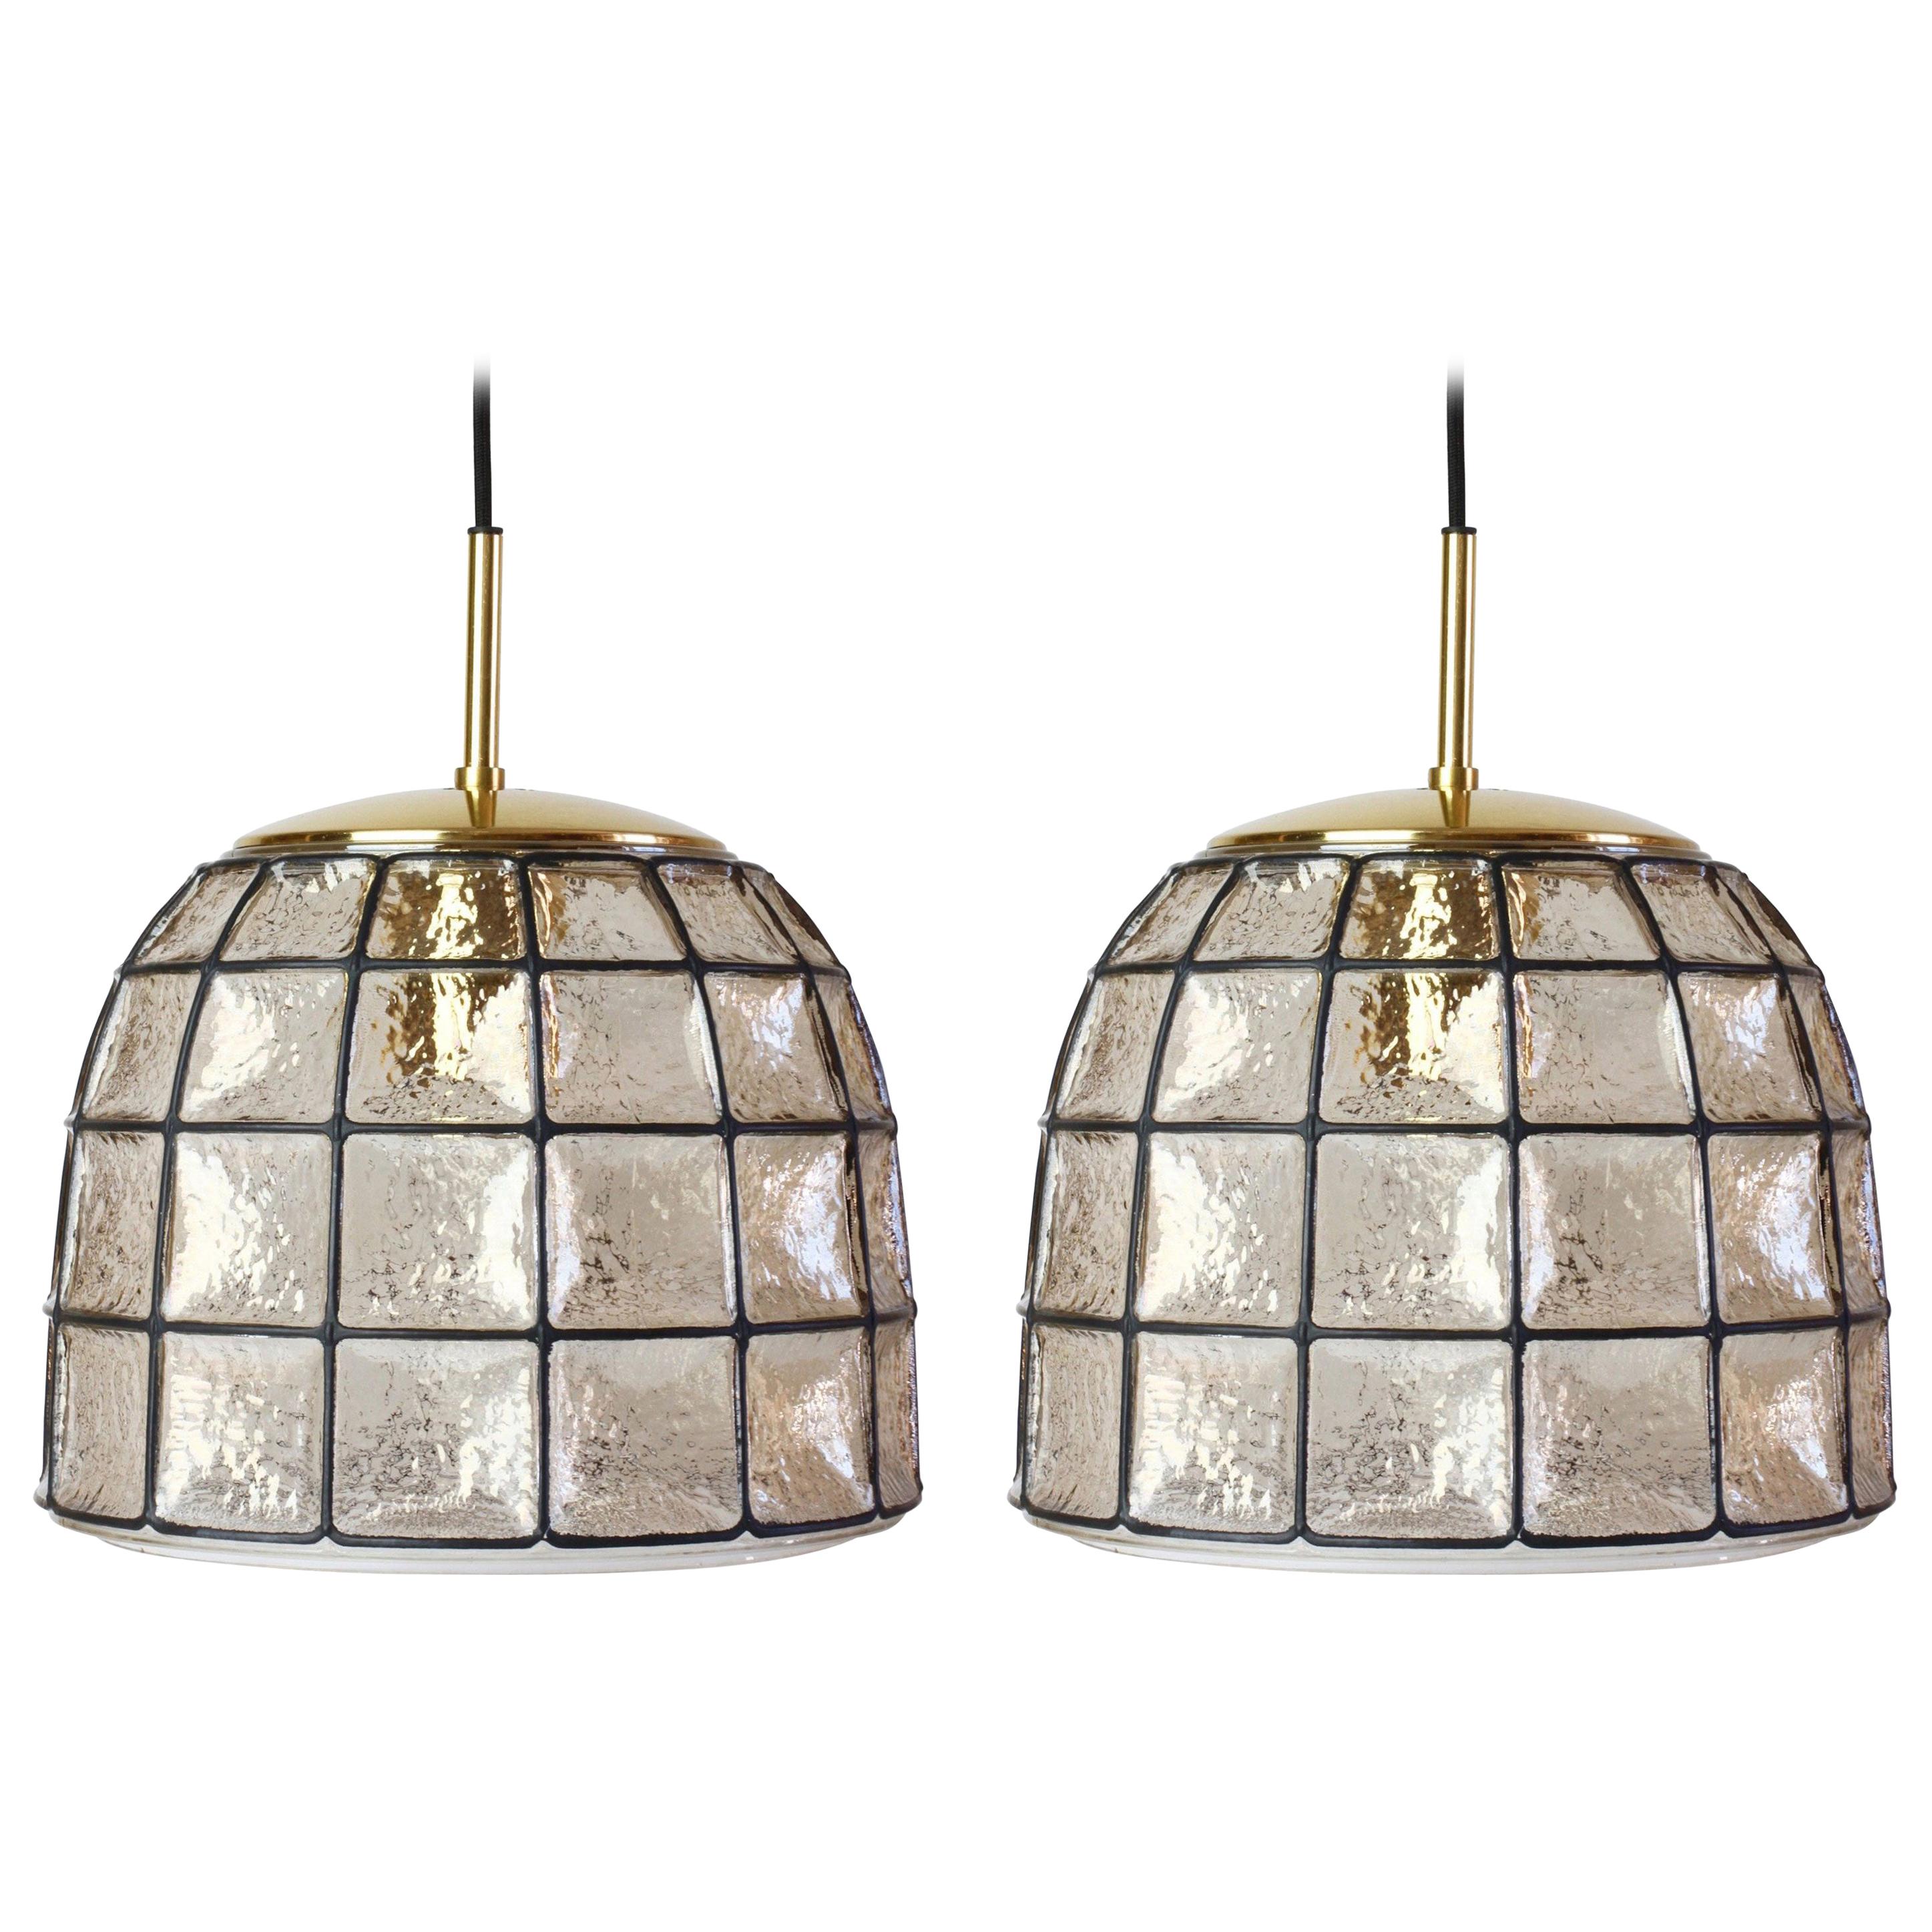 1 of 3 Limburg Vintage Black Iron, Glass and Brass Bell Pendant Lights, c.1965 For Sale